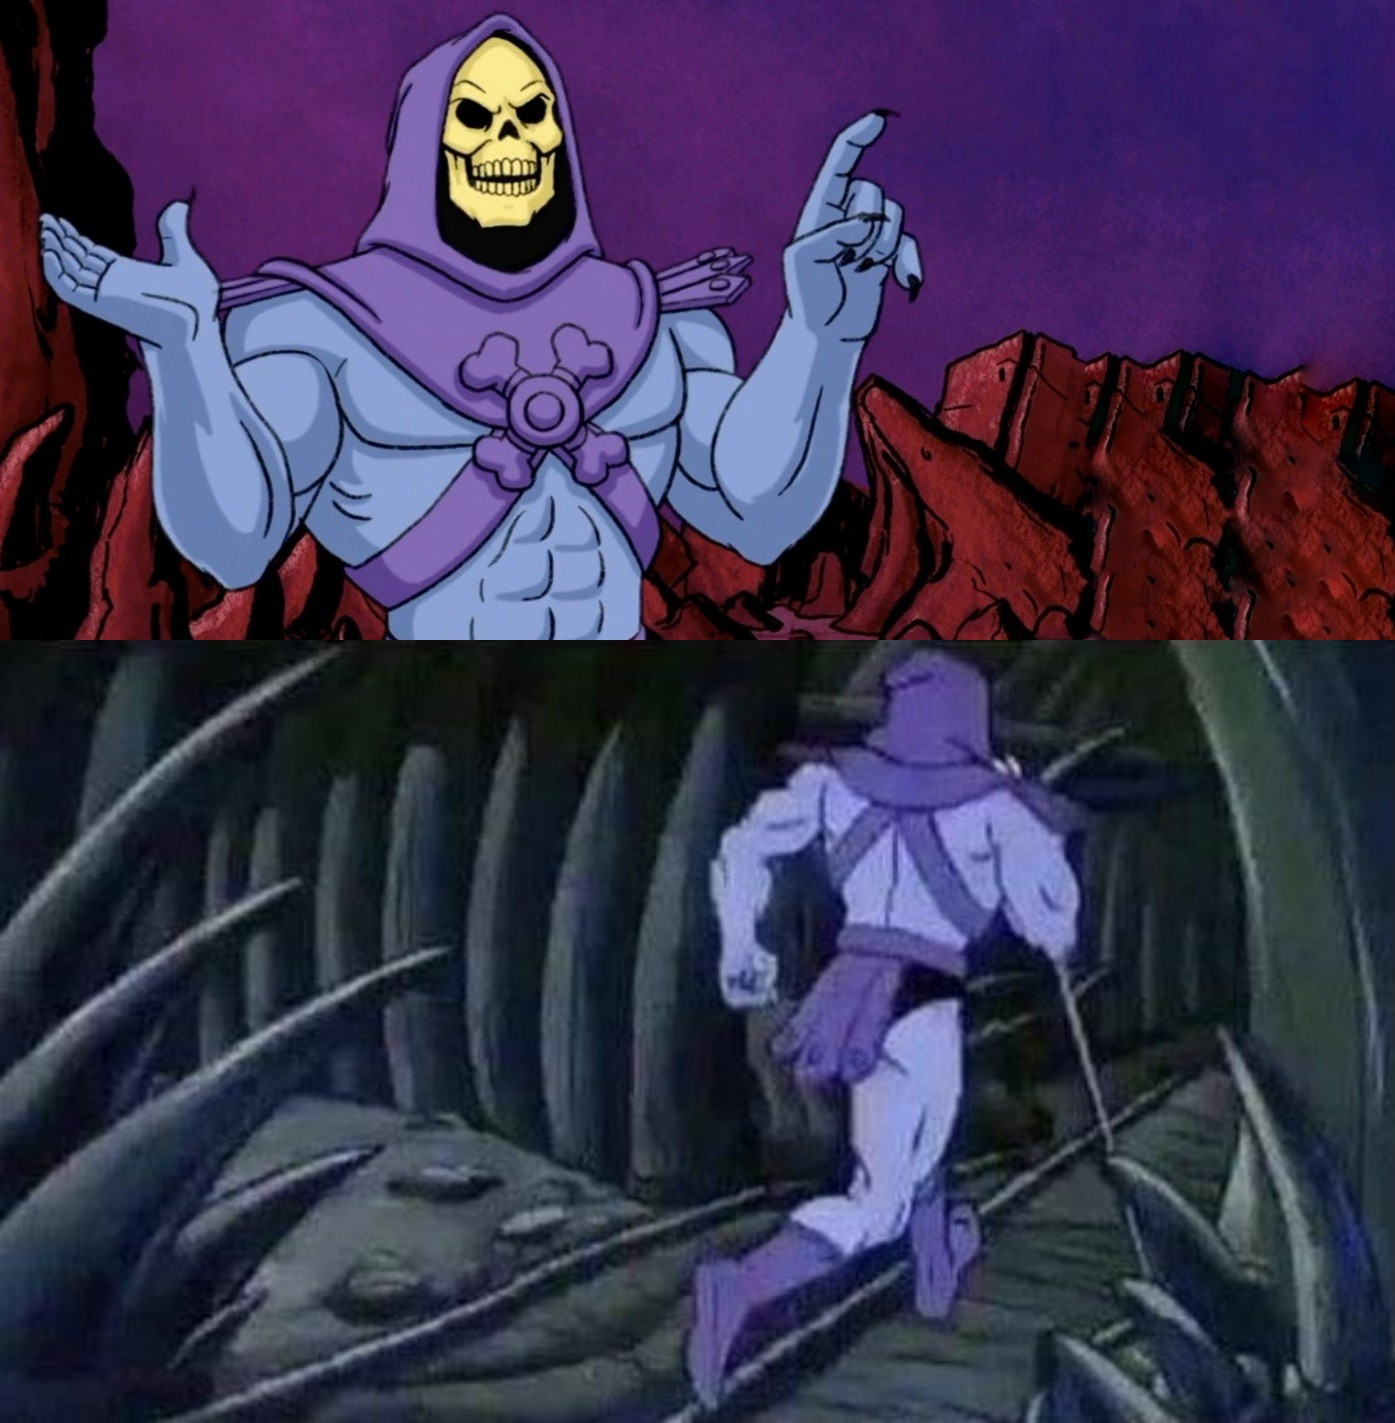 No "Skeletor fact" memes have been featured yet. 